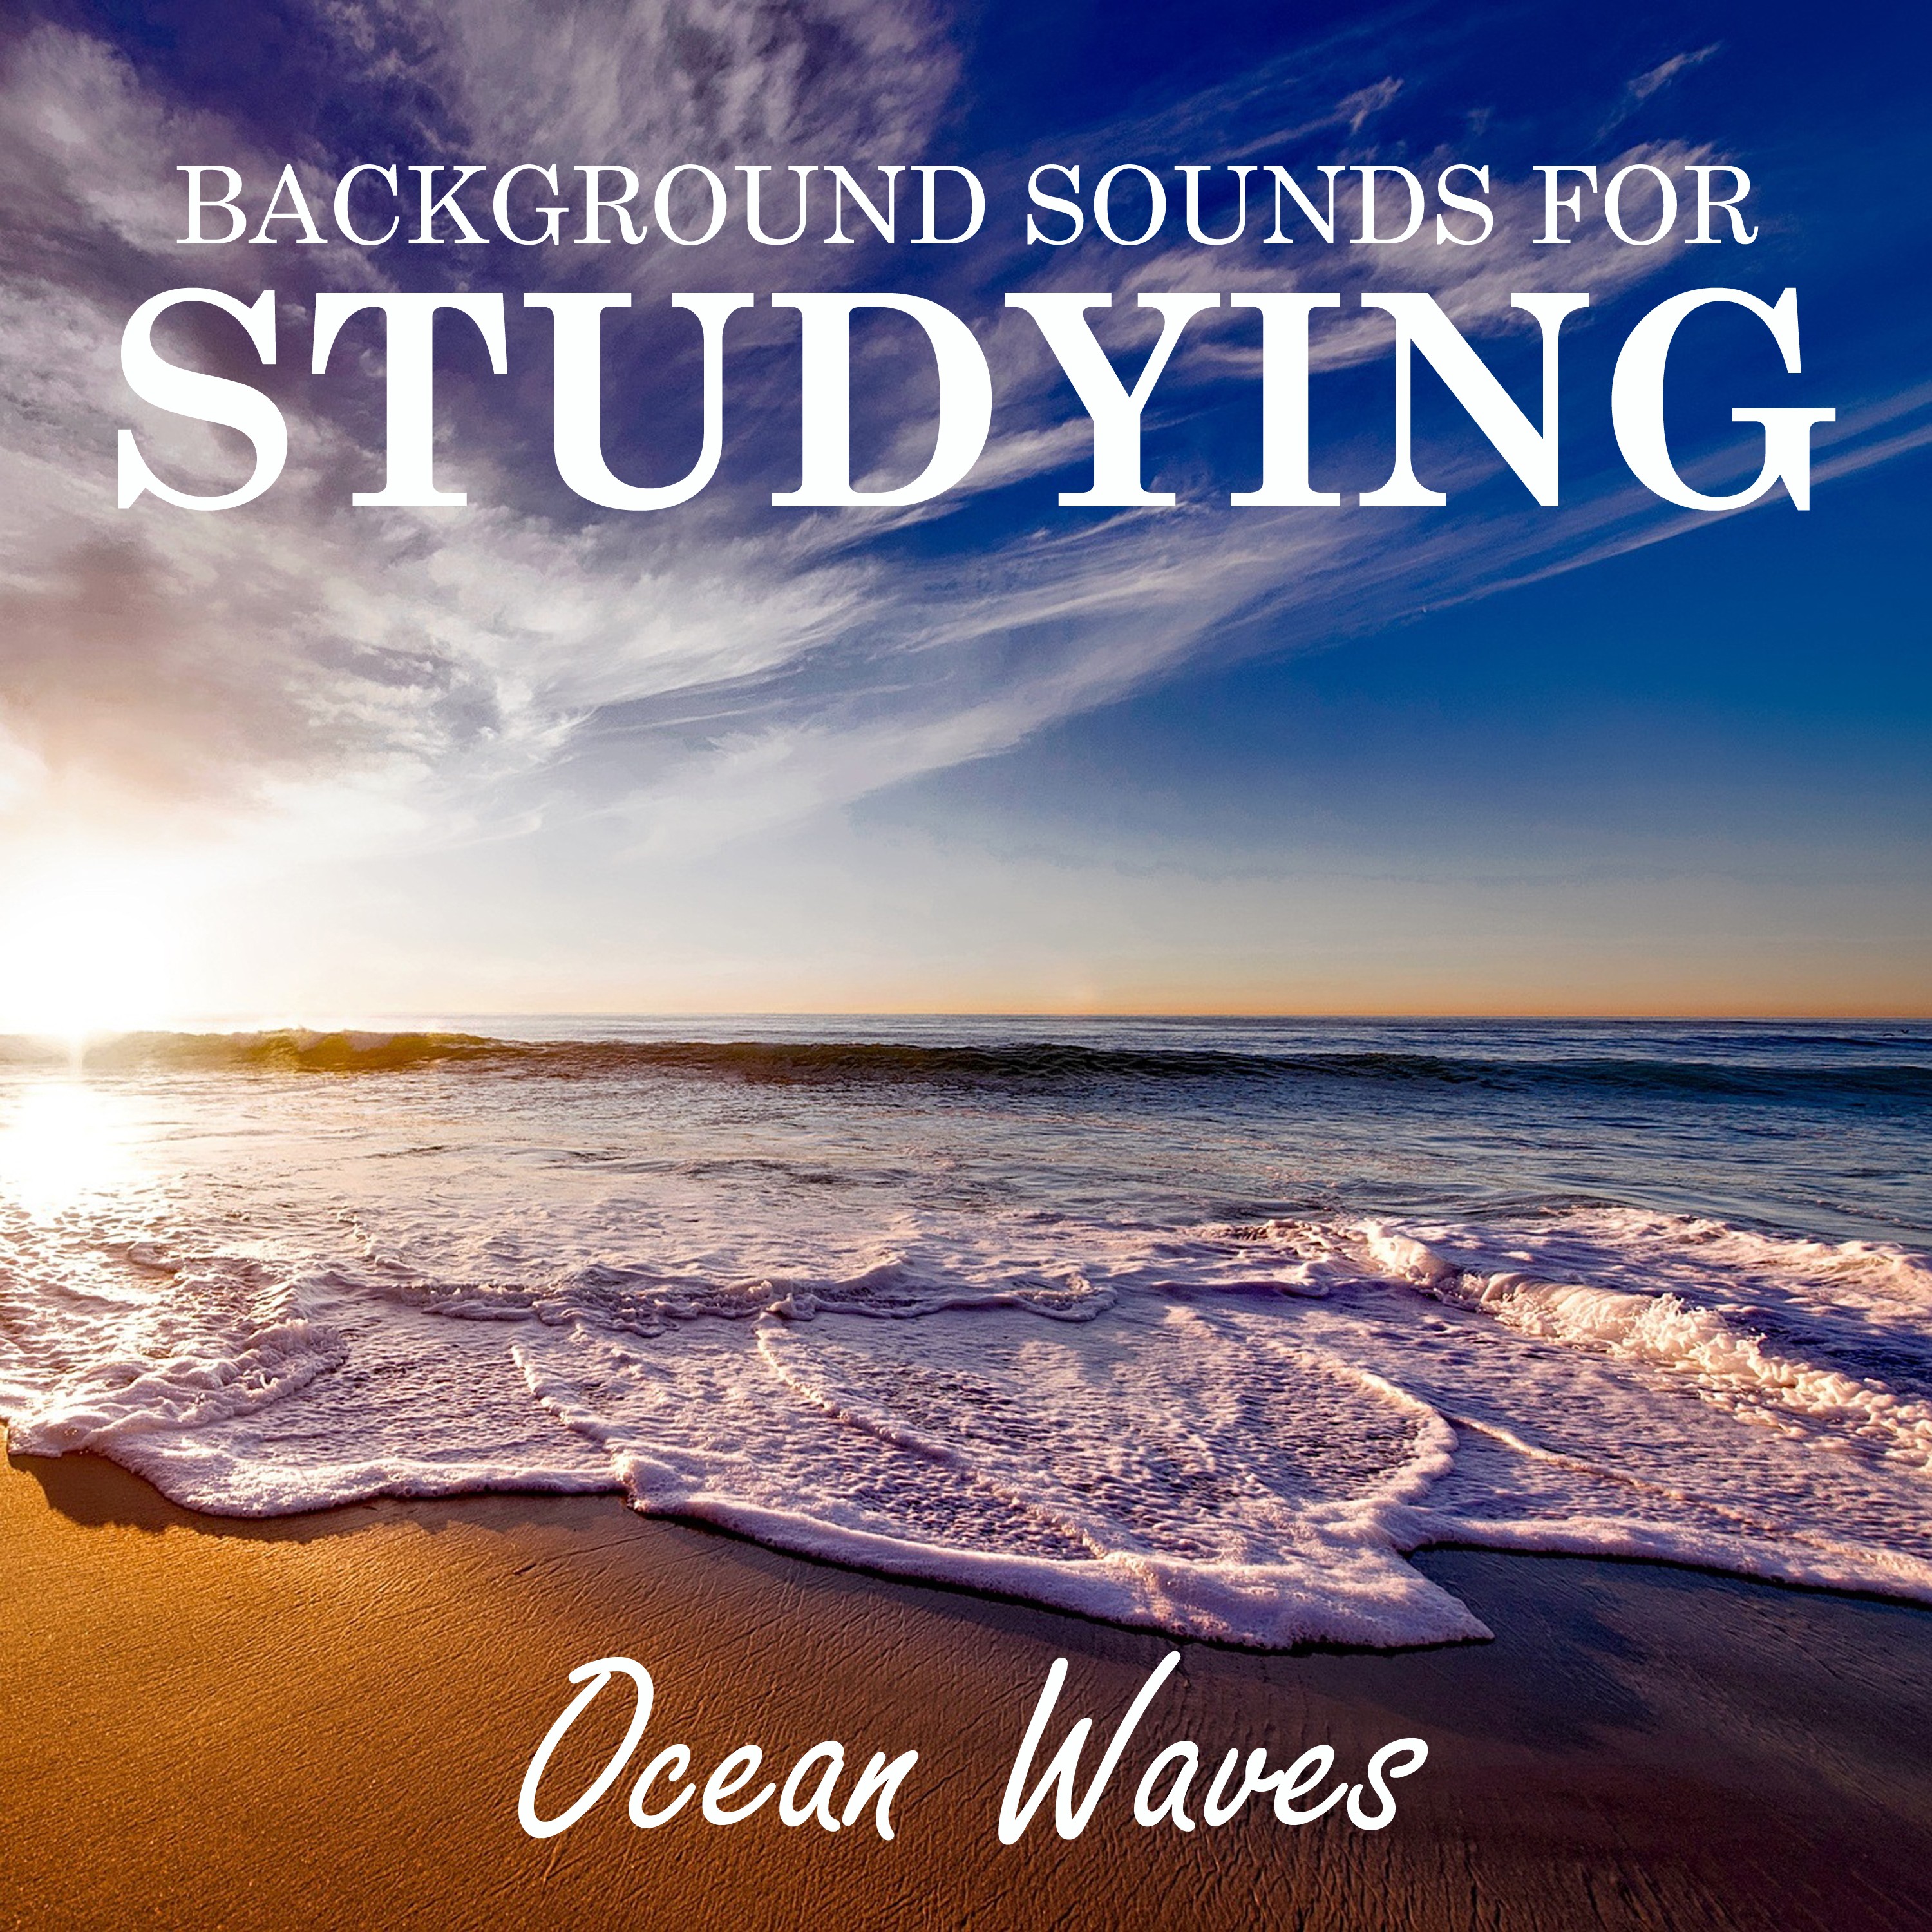 Background Sounds for Studying: Ocean Waves